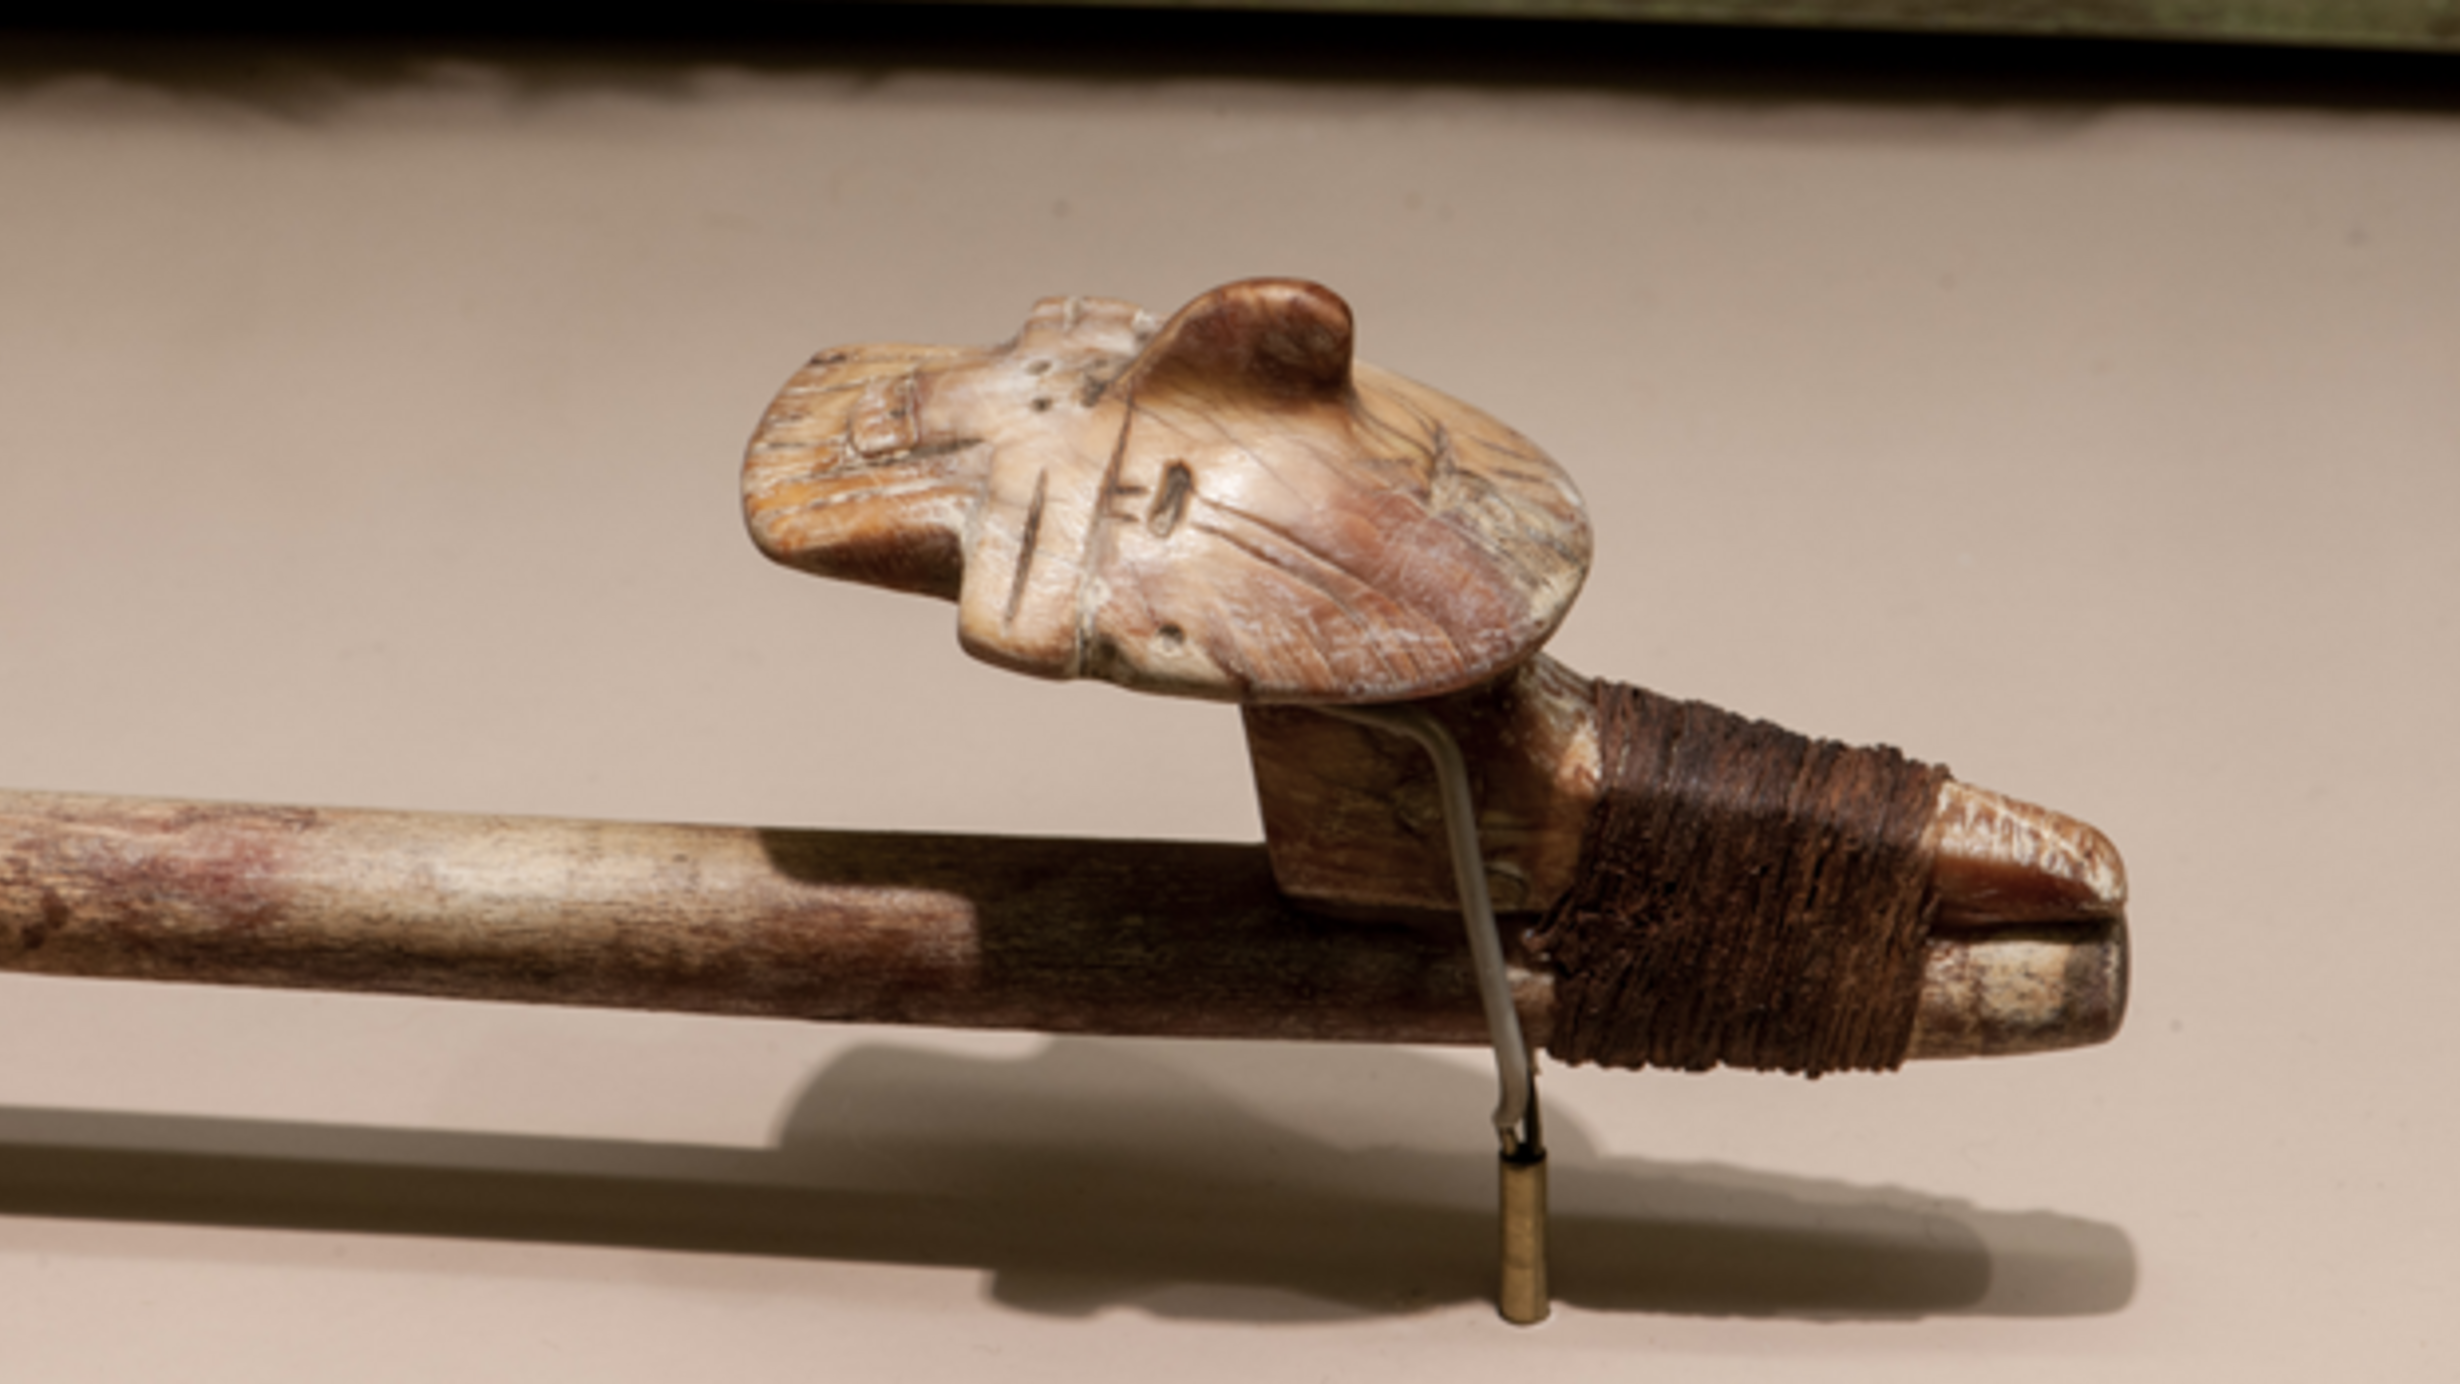 At the end of the rod of this spear-thrower is a human head, finely-carved with a prominent nose.